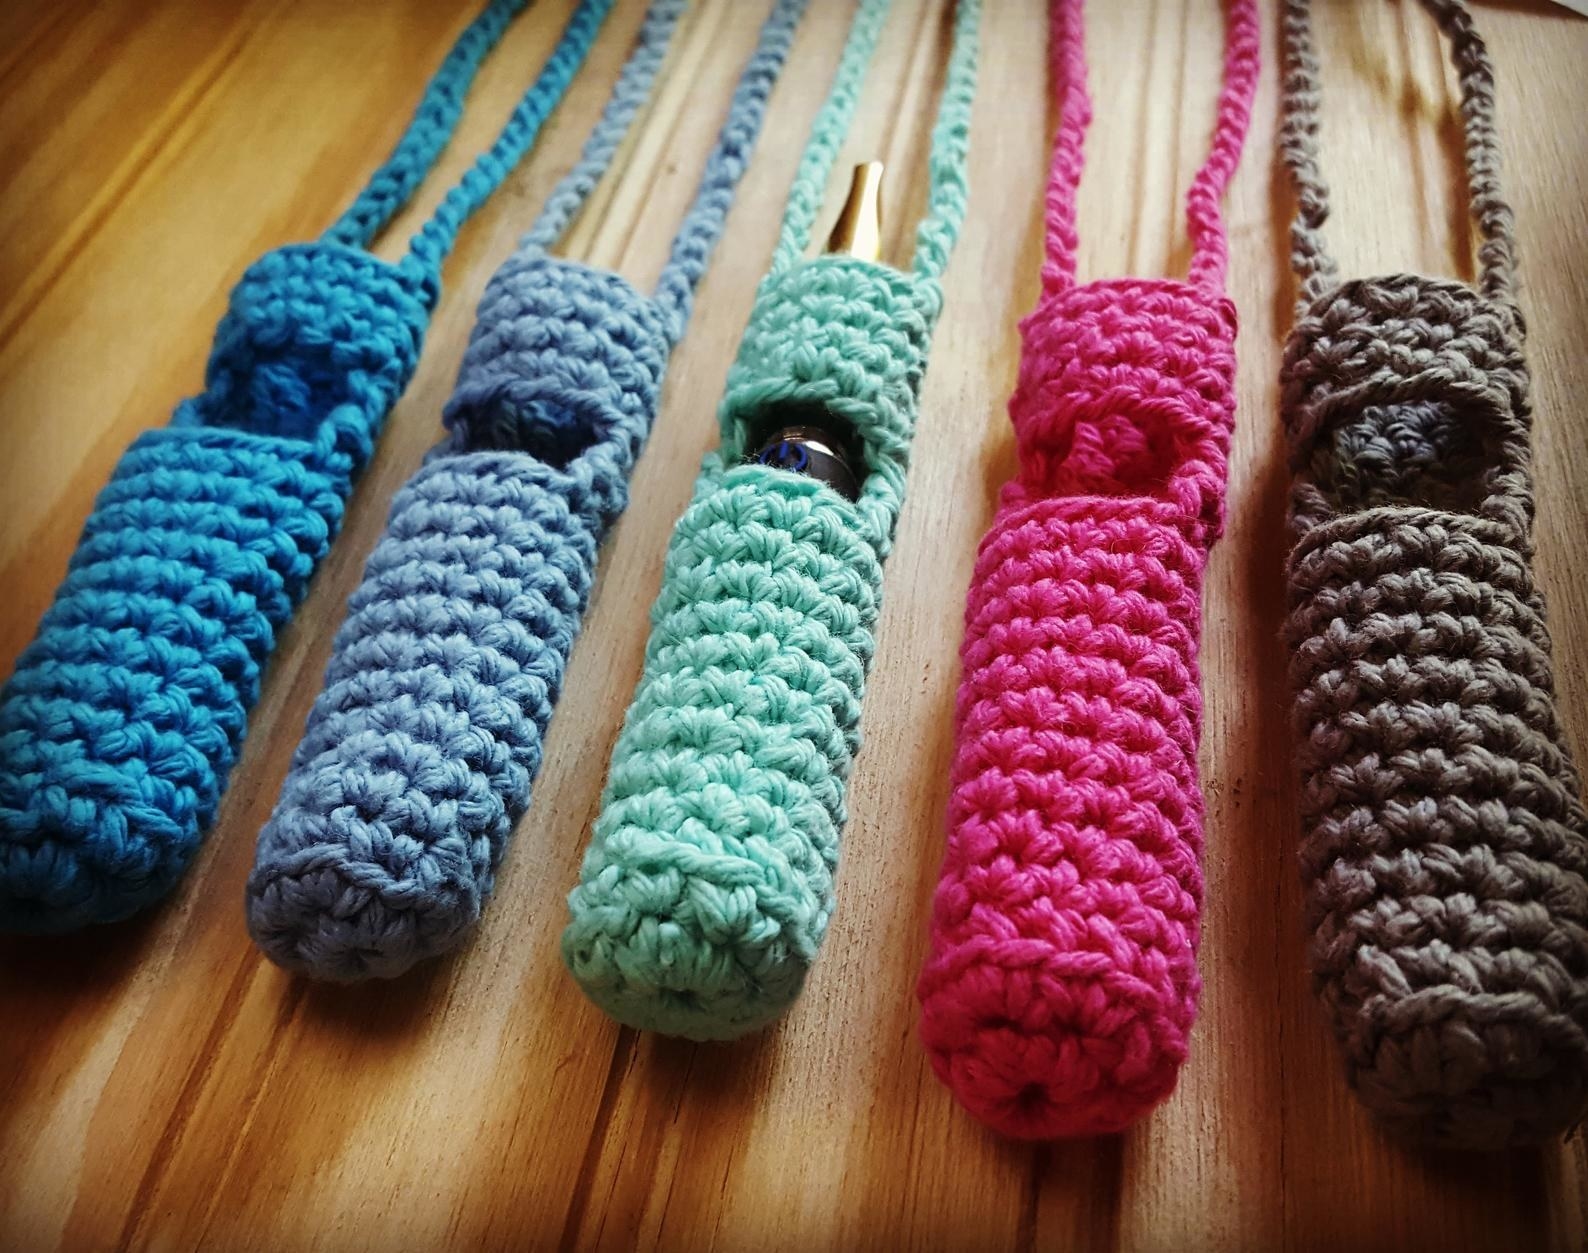 five knitted vape holders in different colors including two blues, mint green, pink, and gray. They all have a knitted lanyard too.